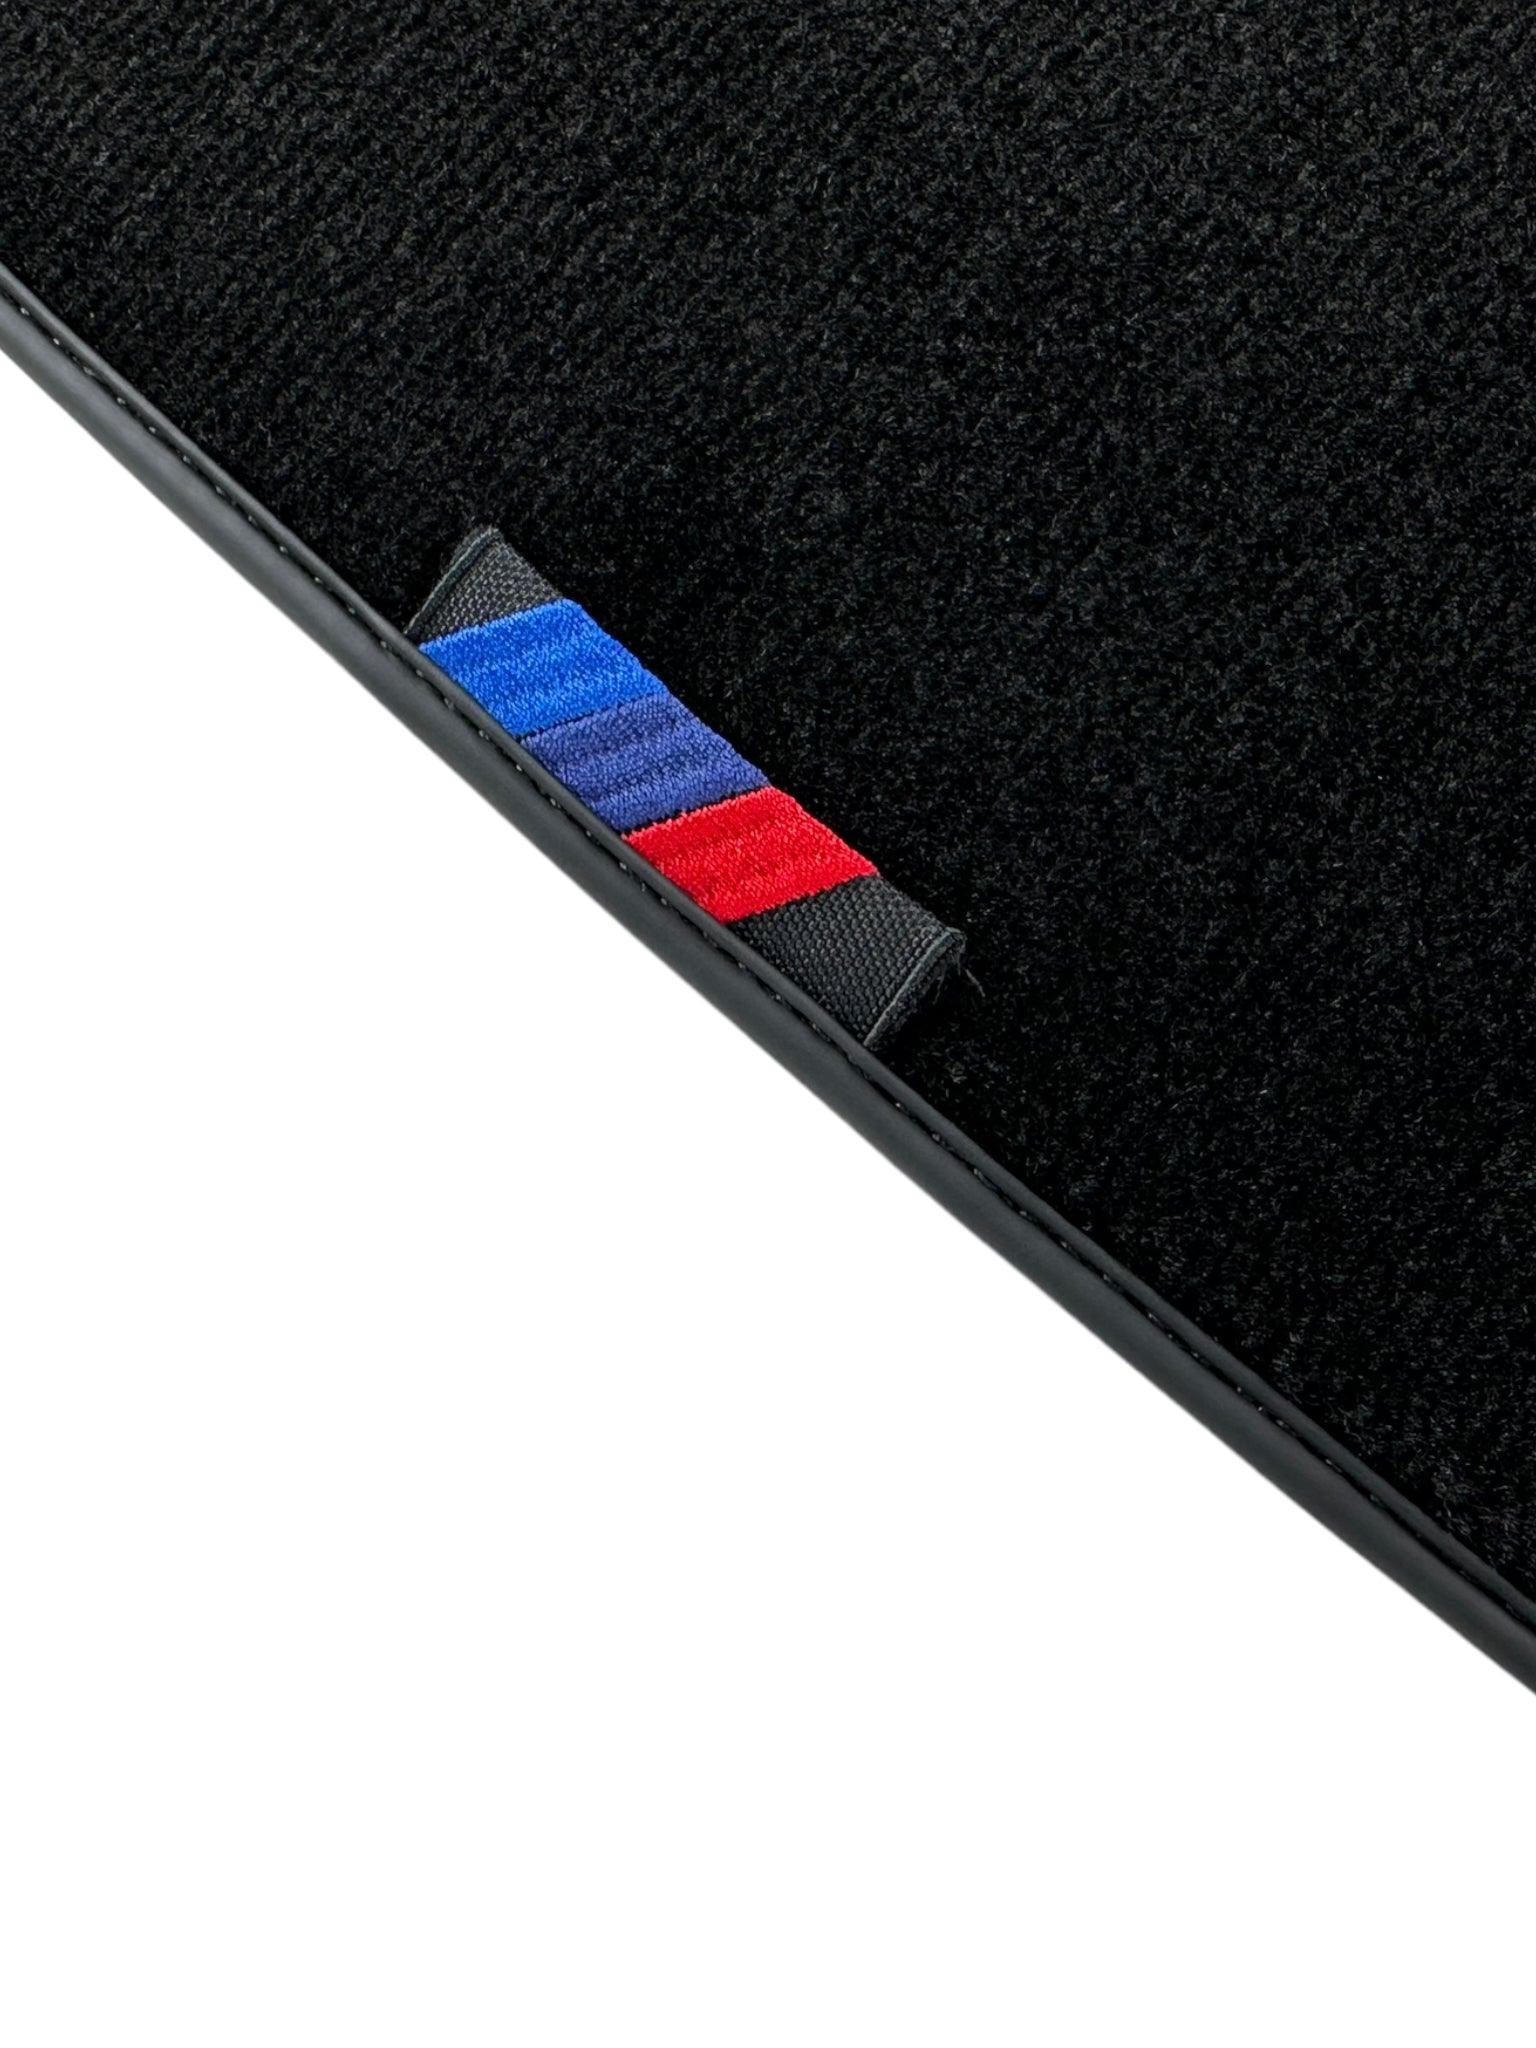 Black Floor Mats For BMW Z4 Series G29 With 3 Color Stripes Tailored Set Perfect Fit - AutoWin